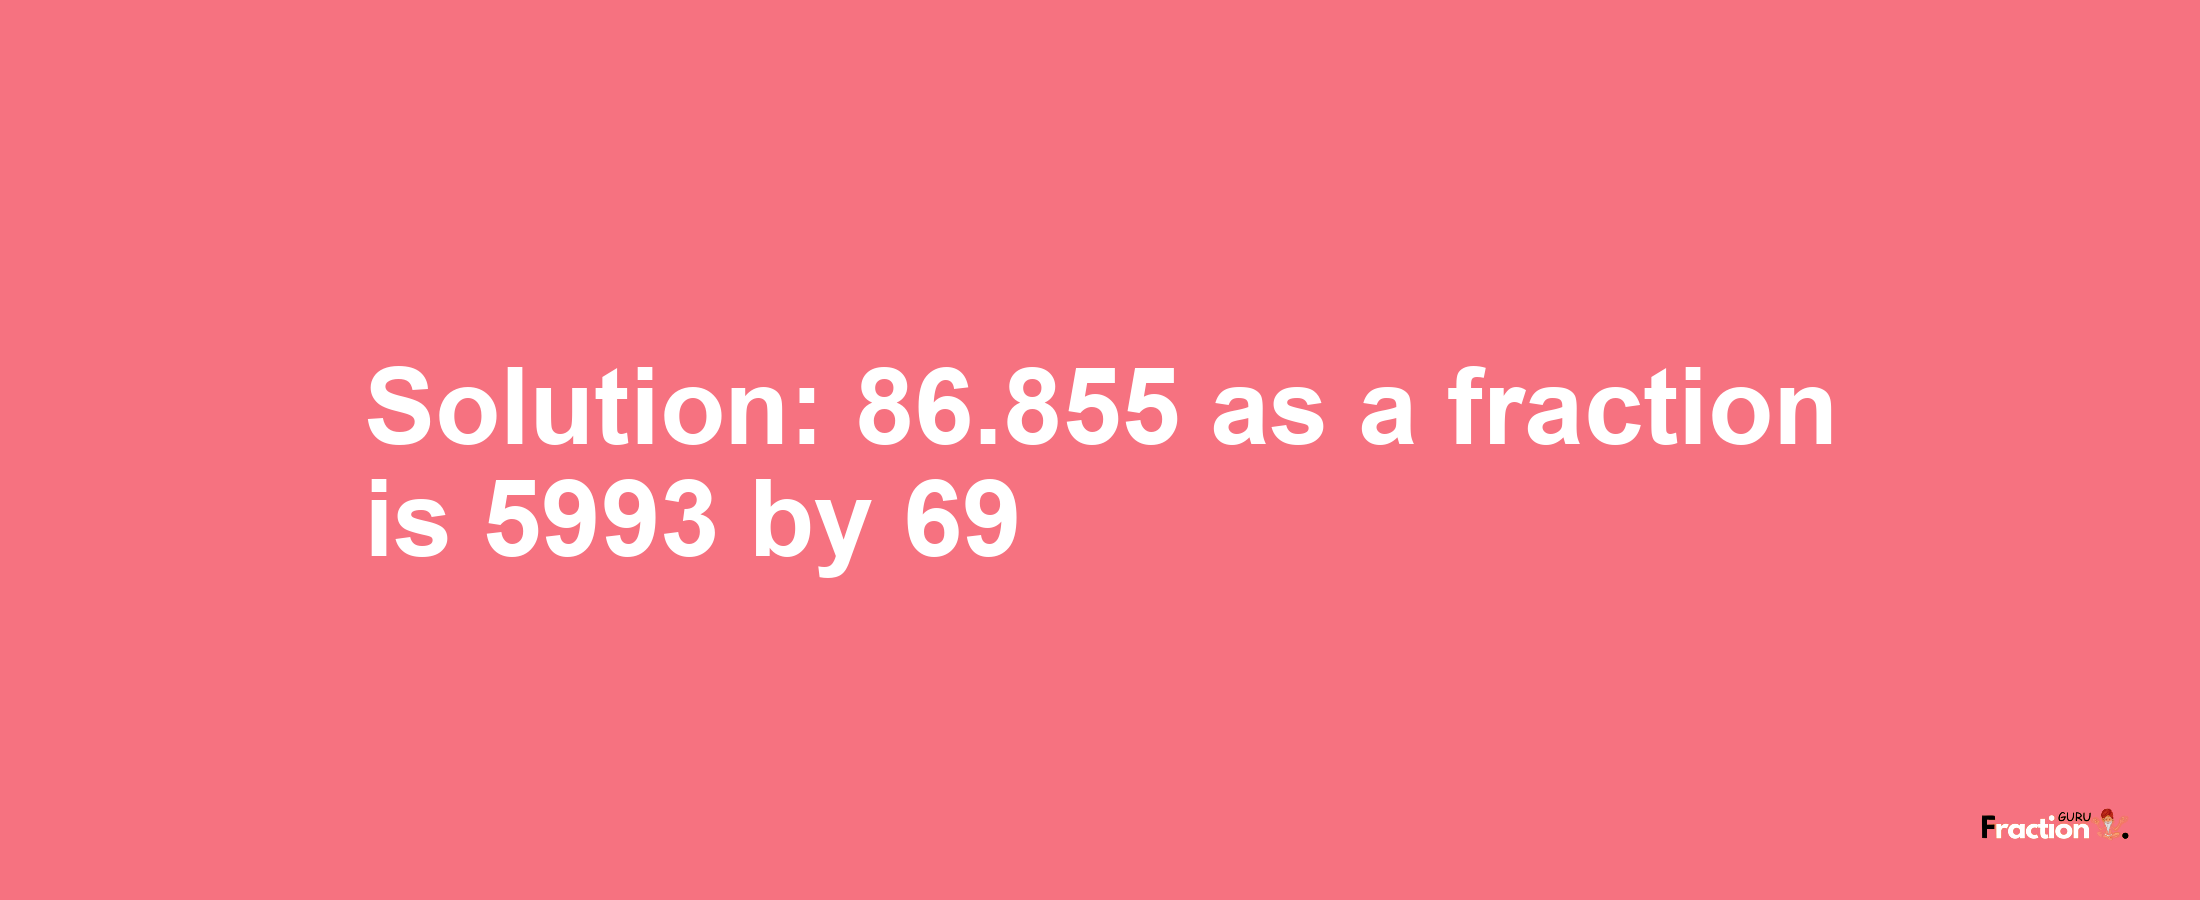 Solution:86.855 as a fraction is 5993/69